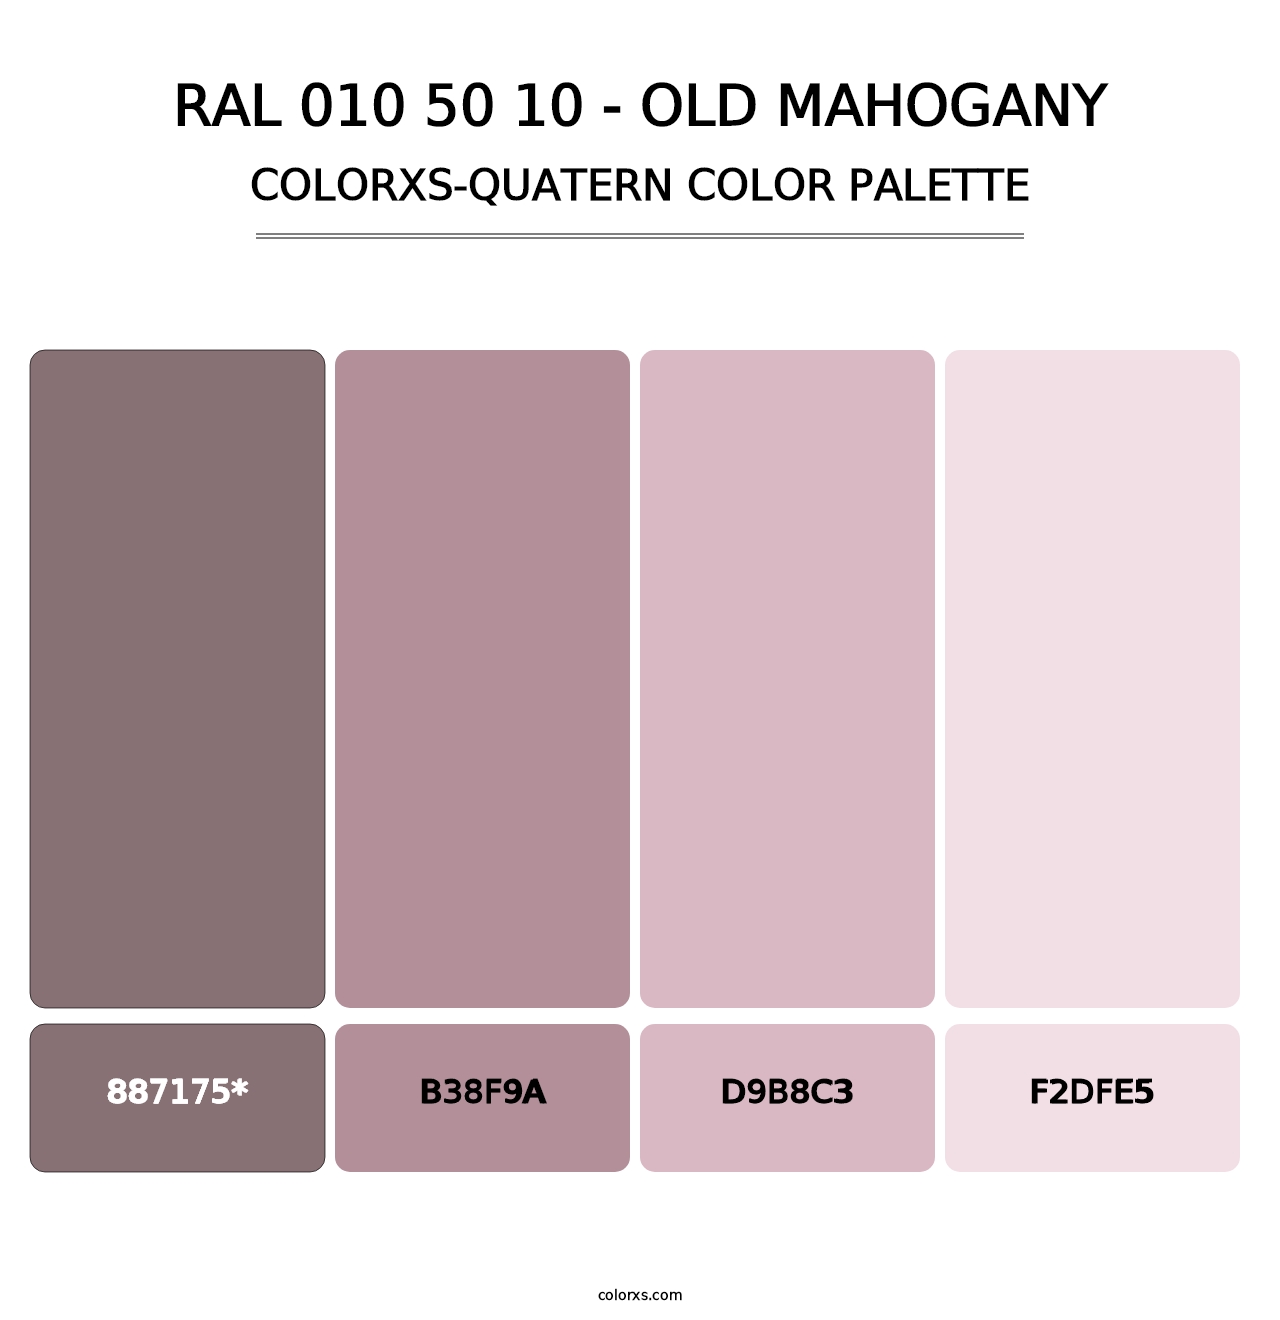 RAL 010 50 10 - Old Mahogany - Colorxs Quatern Palette